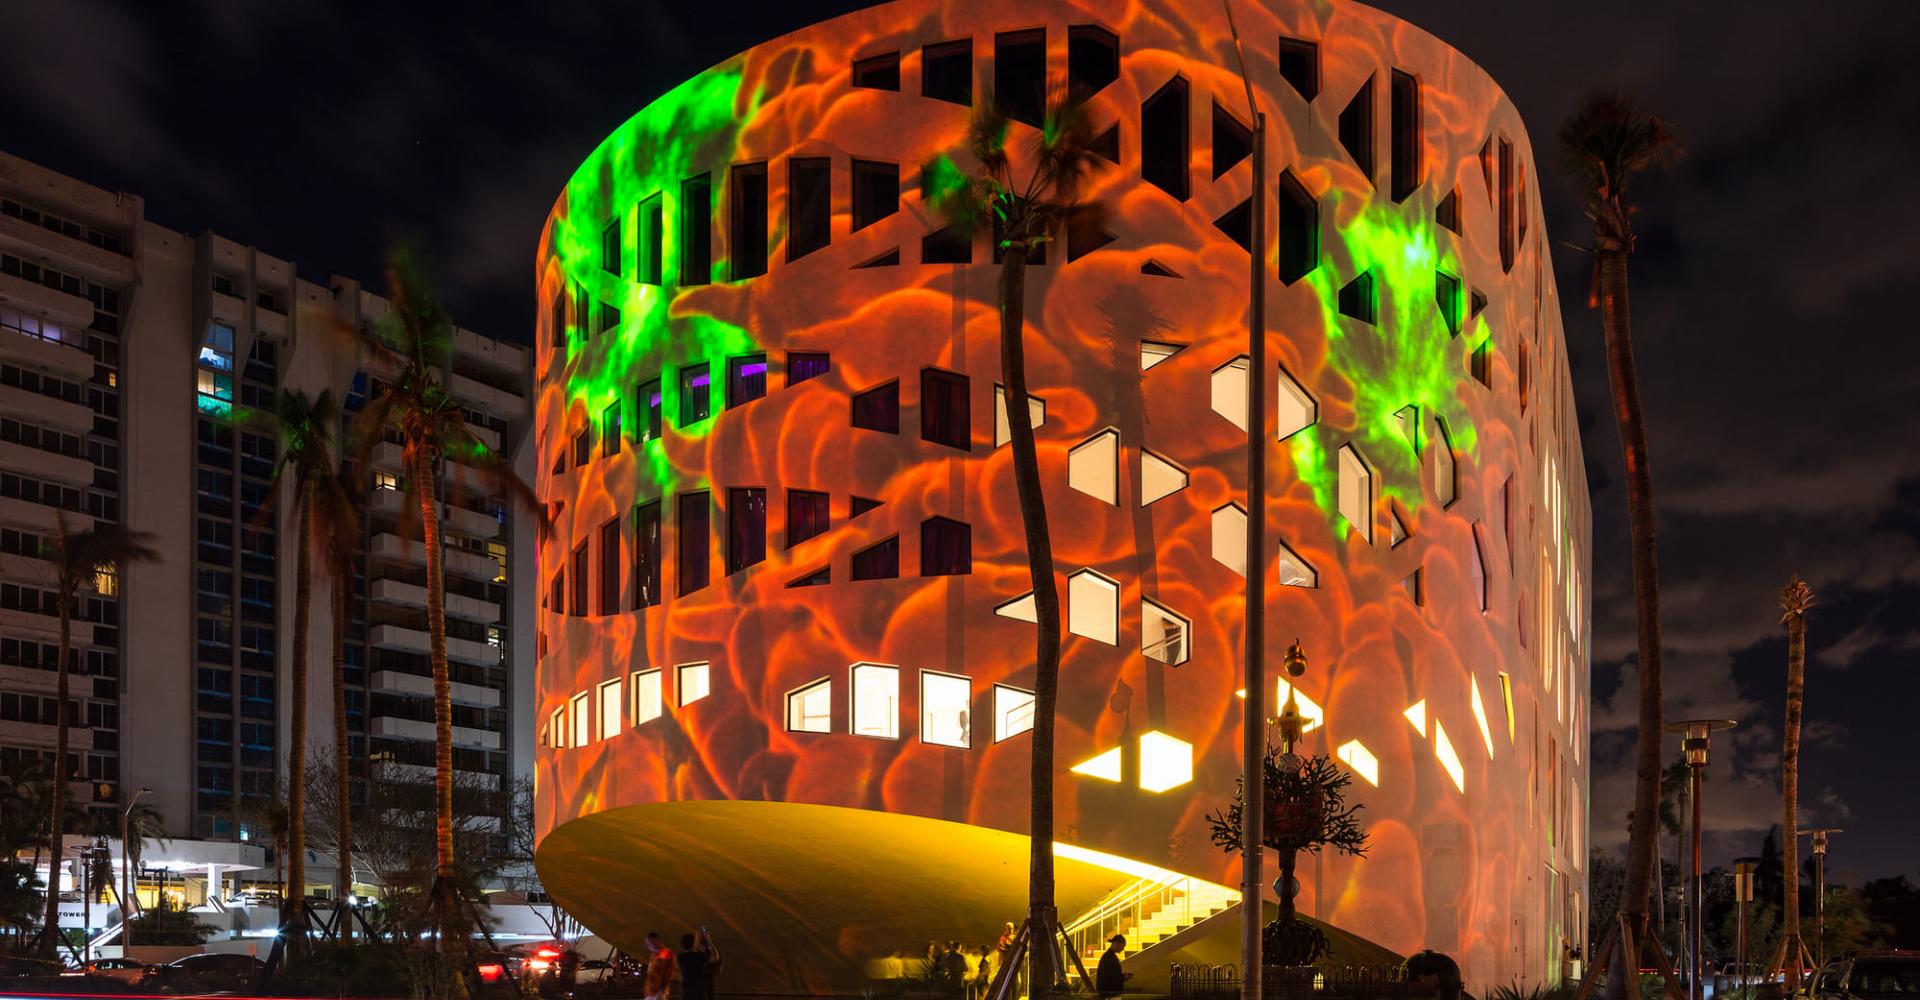 Colourful projections on a cylindrical building